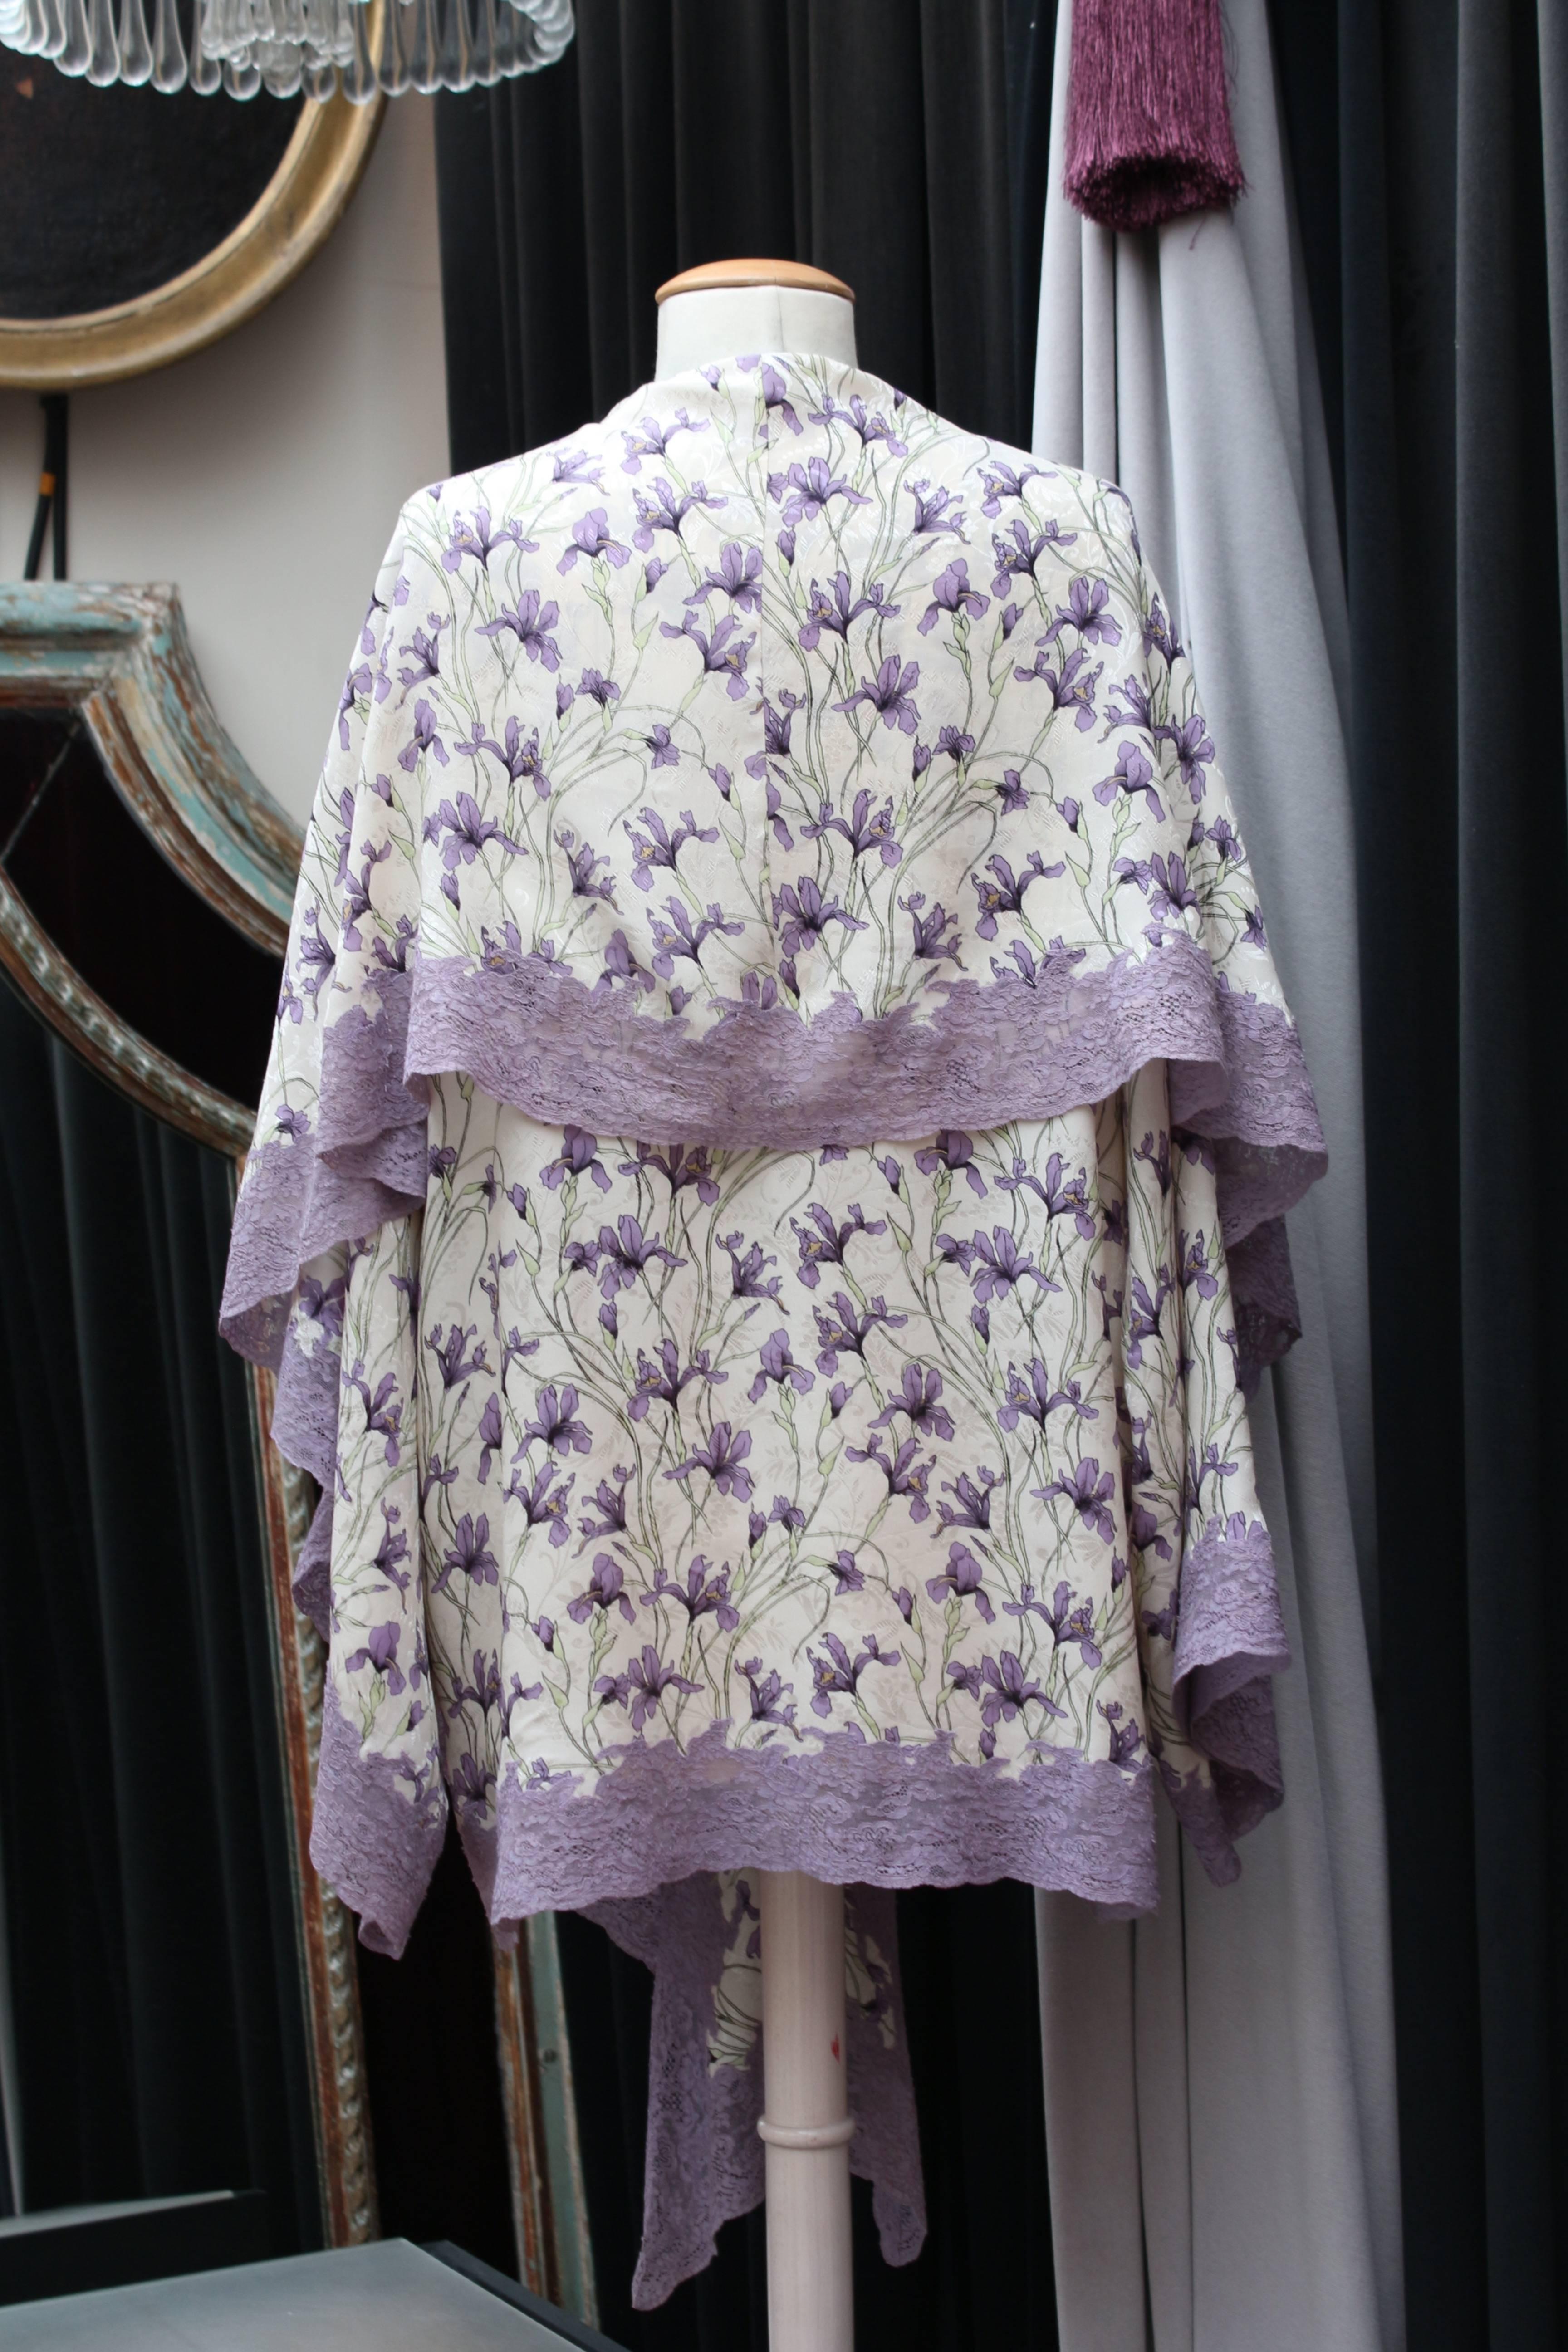 Women's Christian Dior silk “Kimono” style with floral pattern negligee